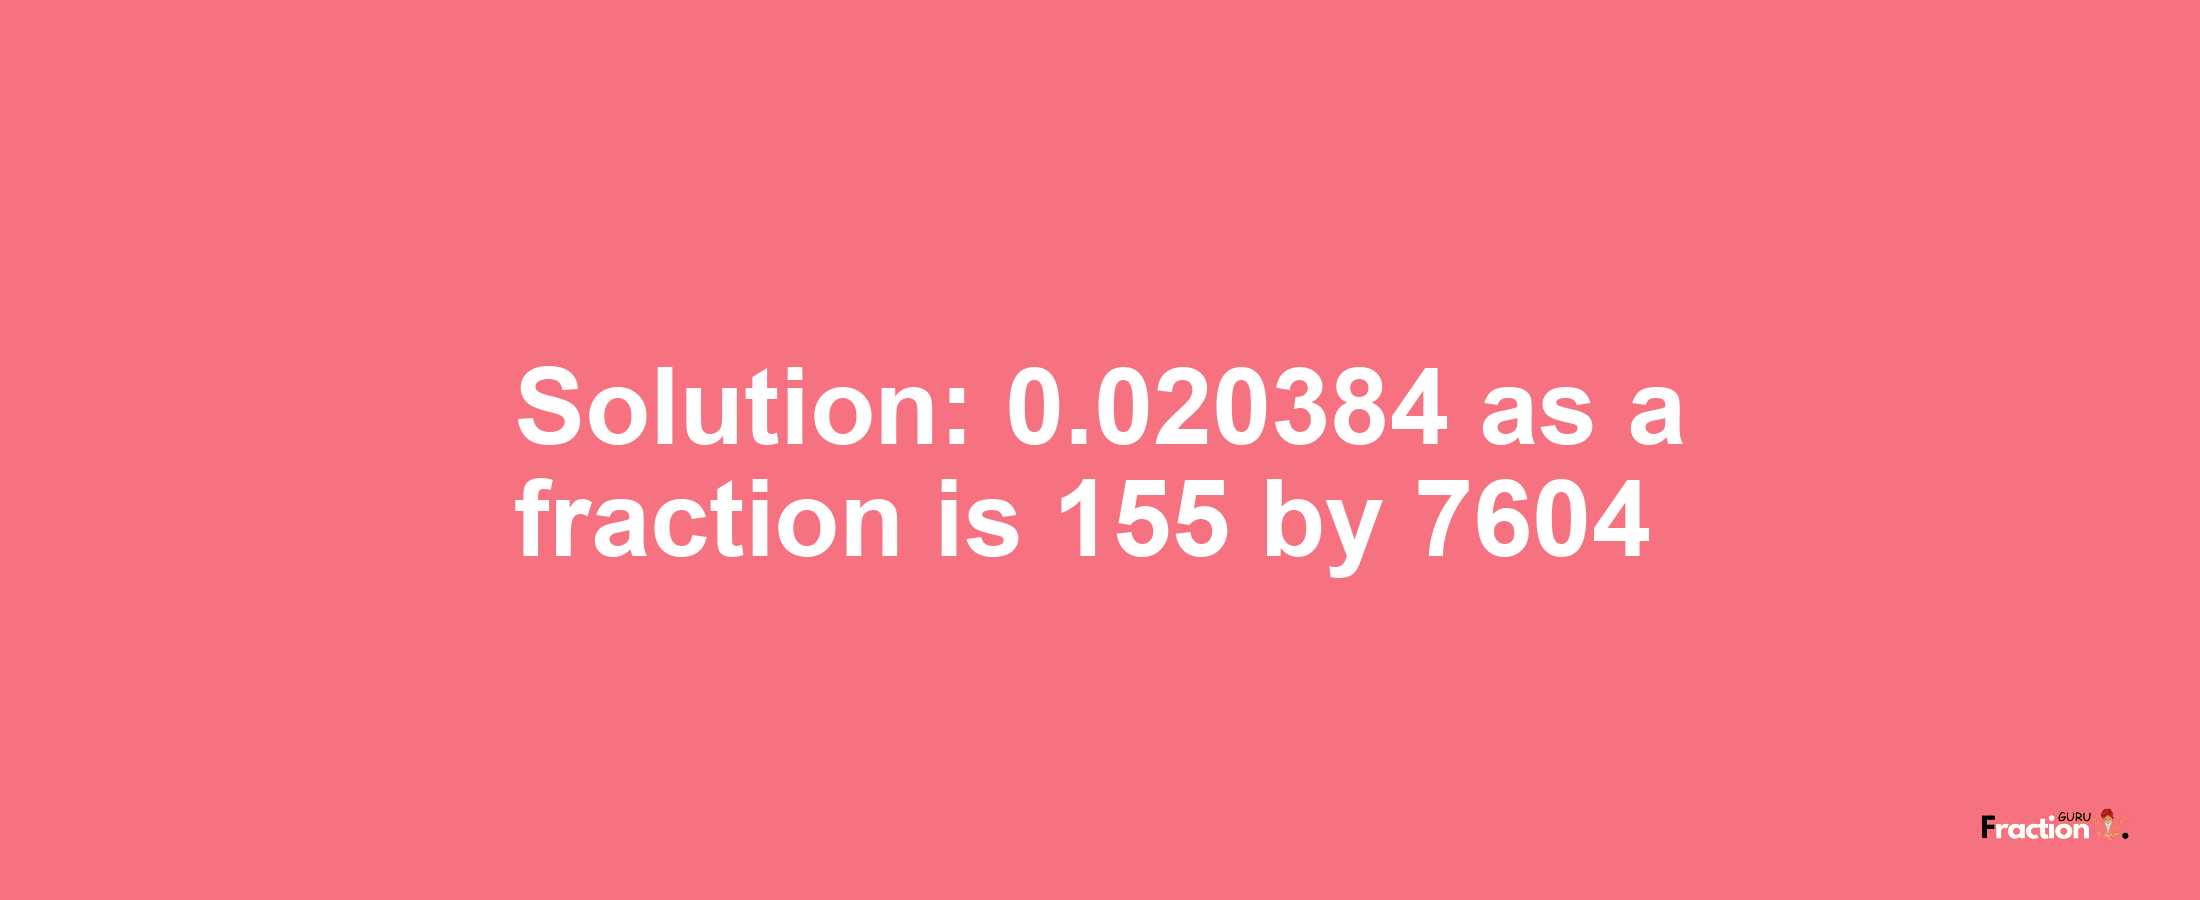 Solution:0.020384 as a fraction is 155/7604